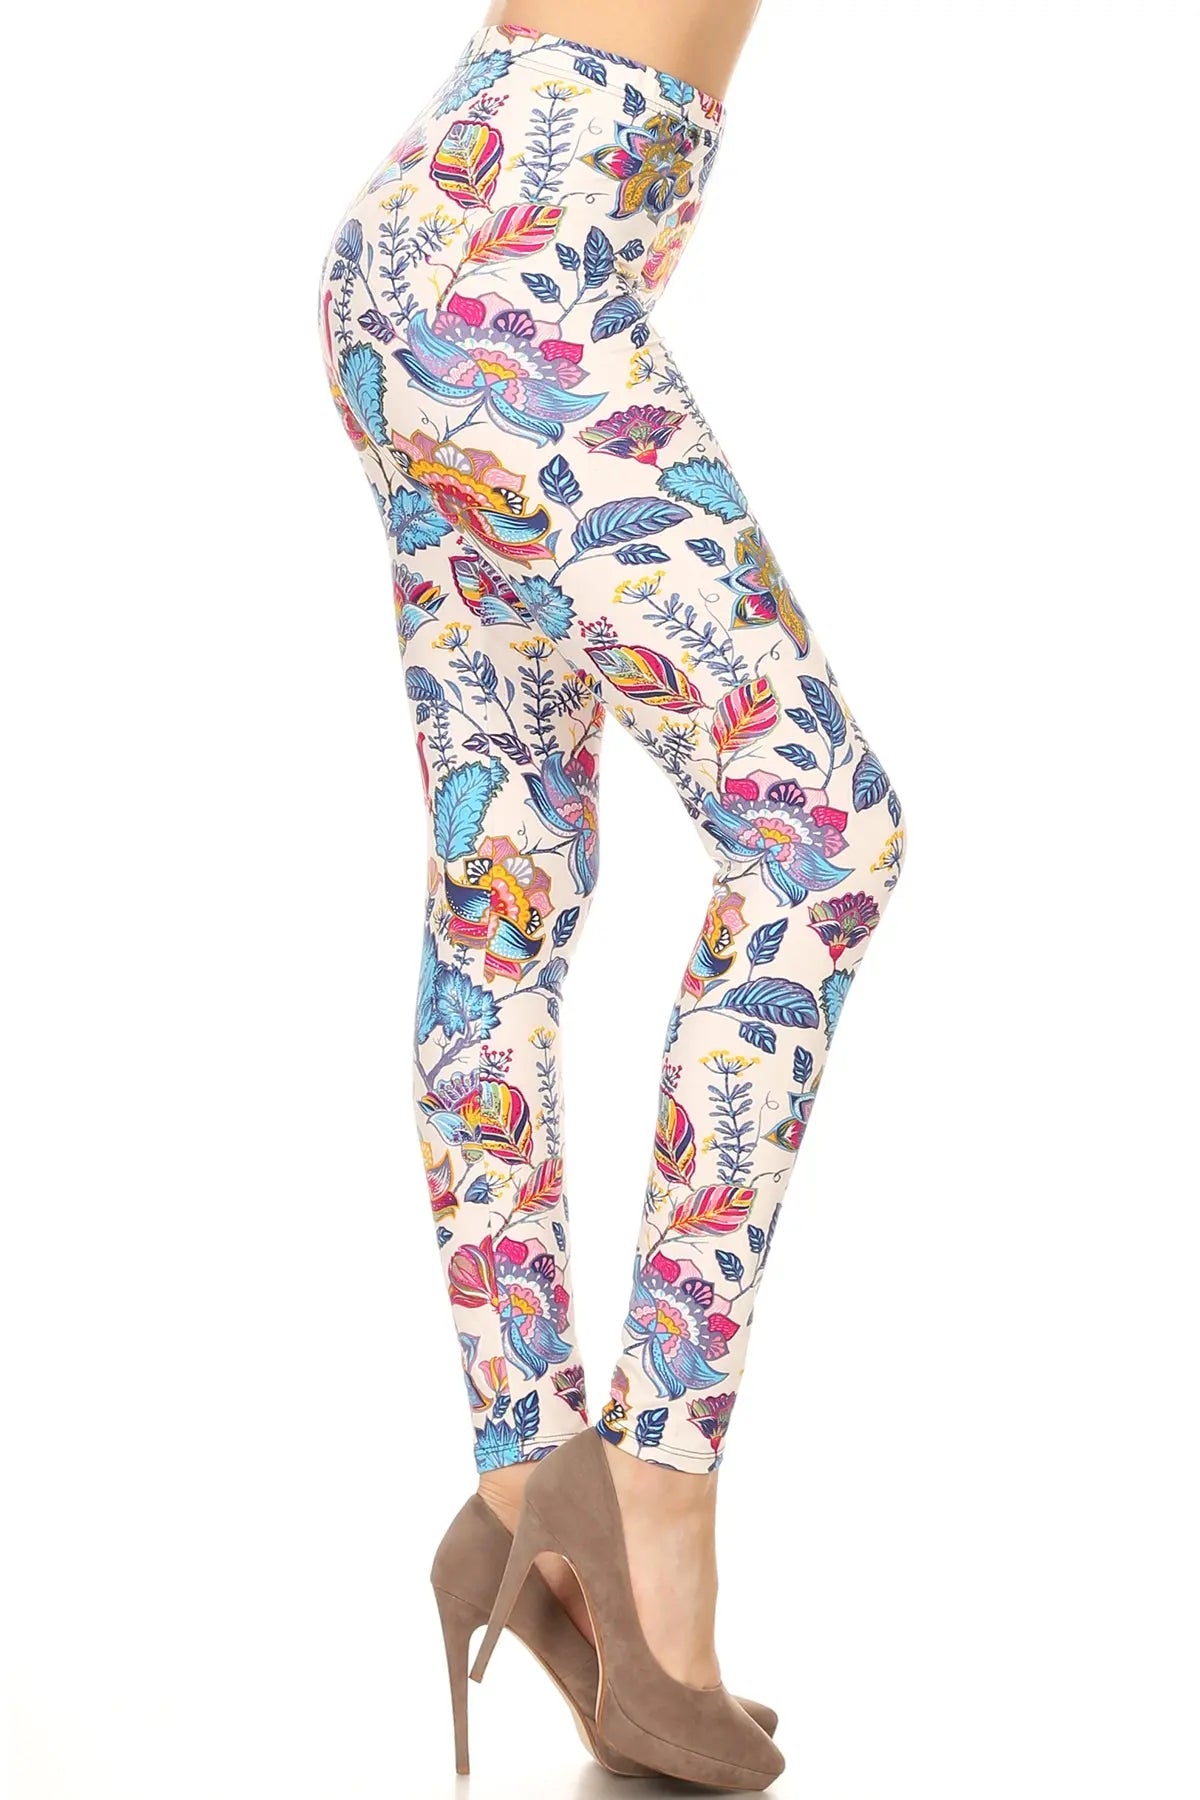 Floral Printed Lined Knit Legging With Elastic Waistband Sunny EvE Fashion